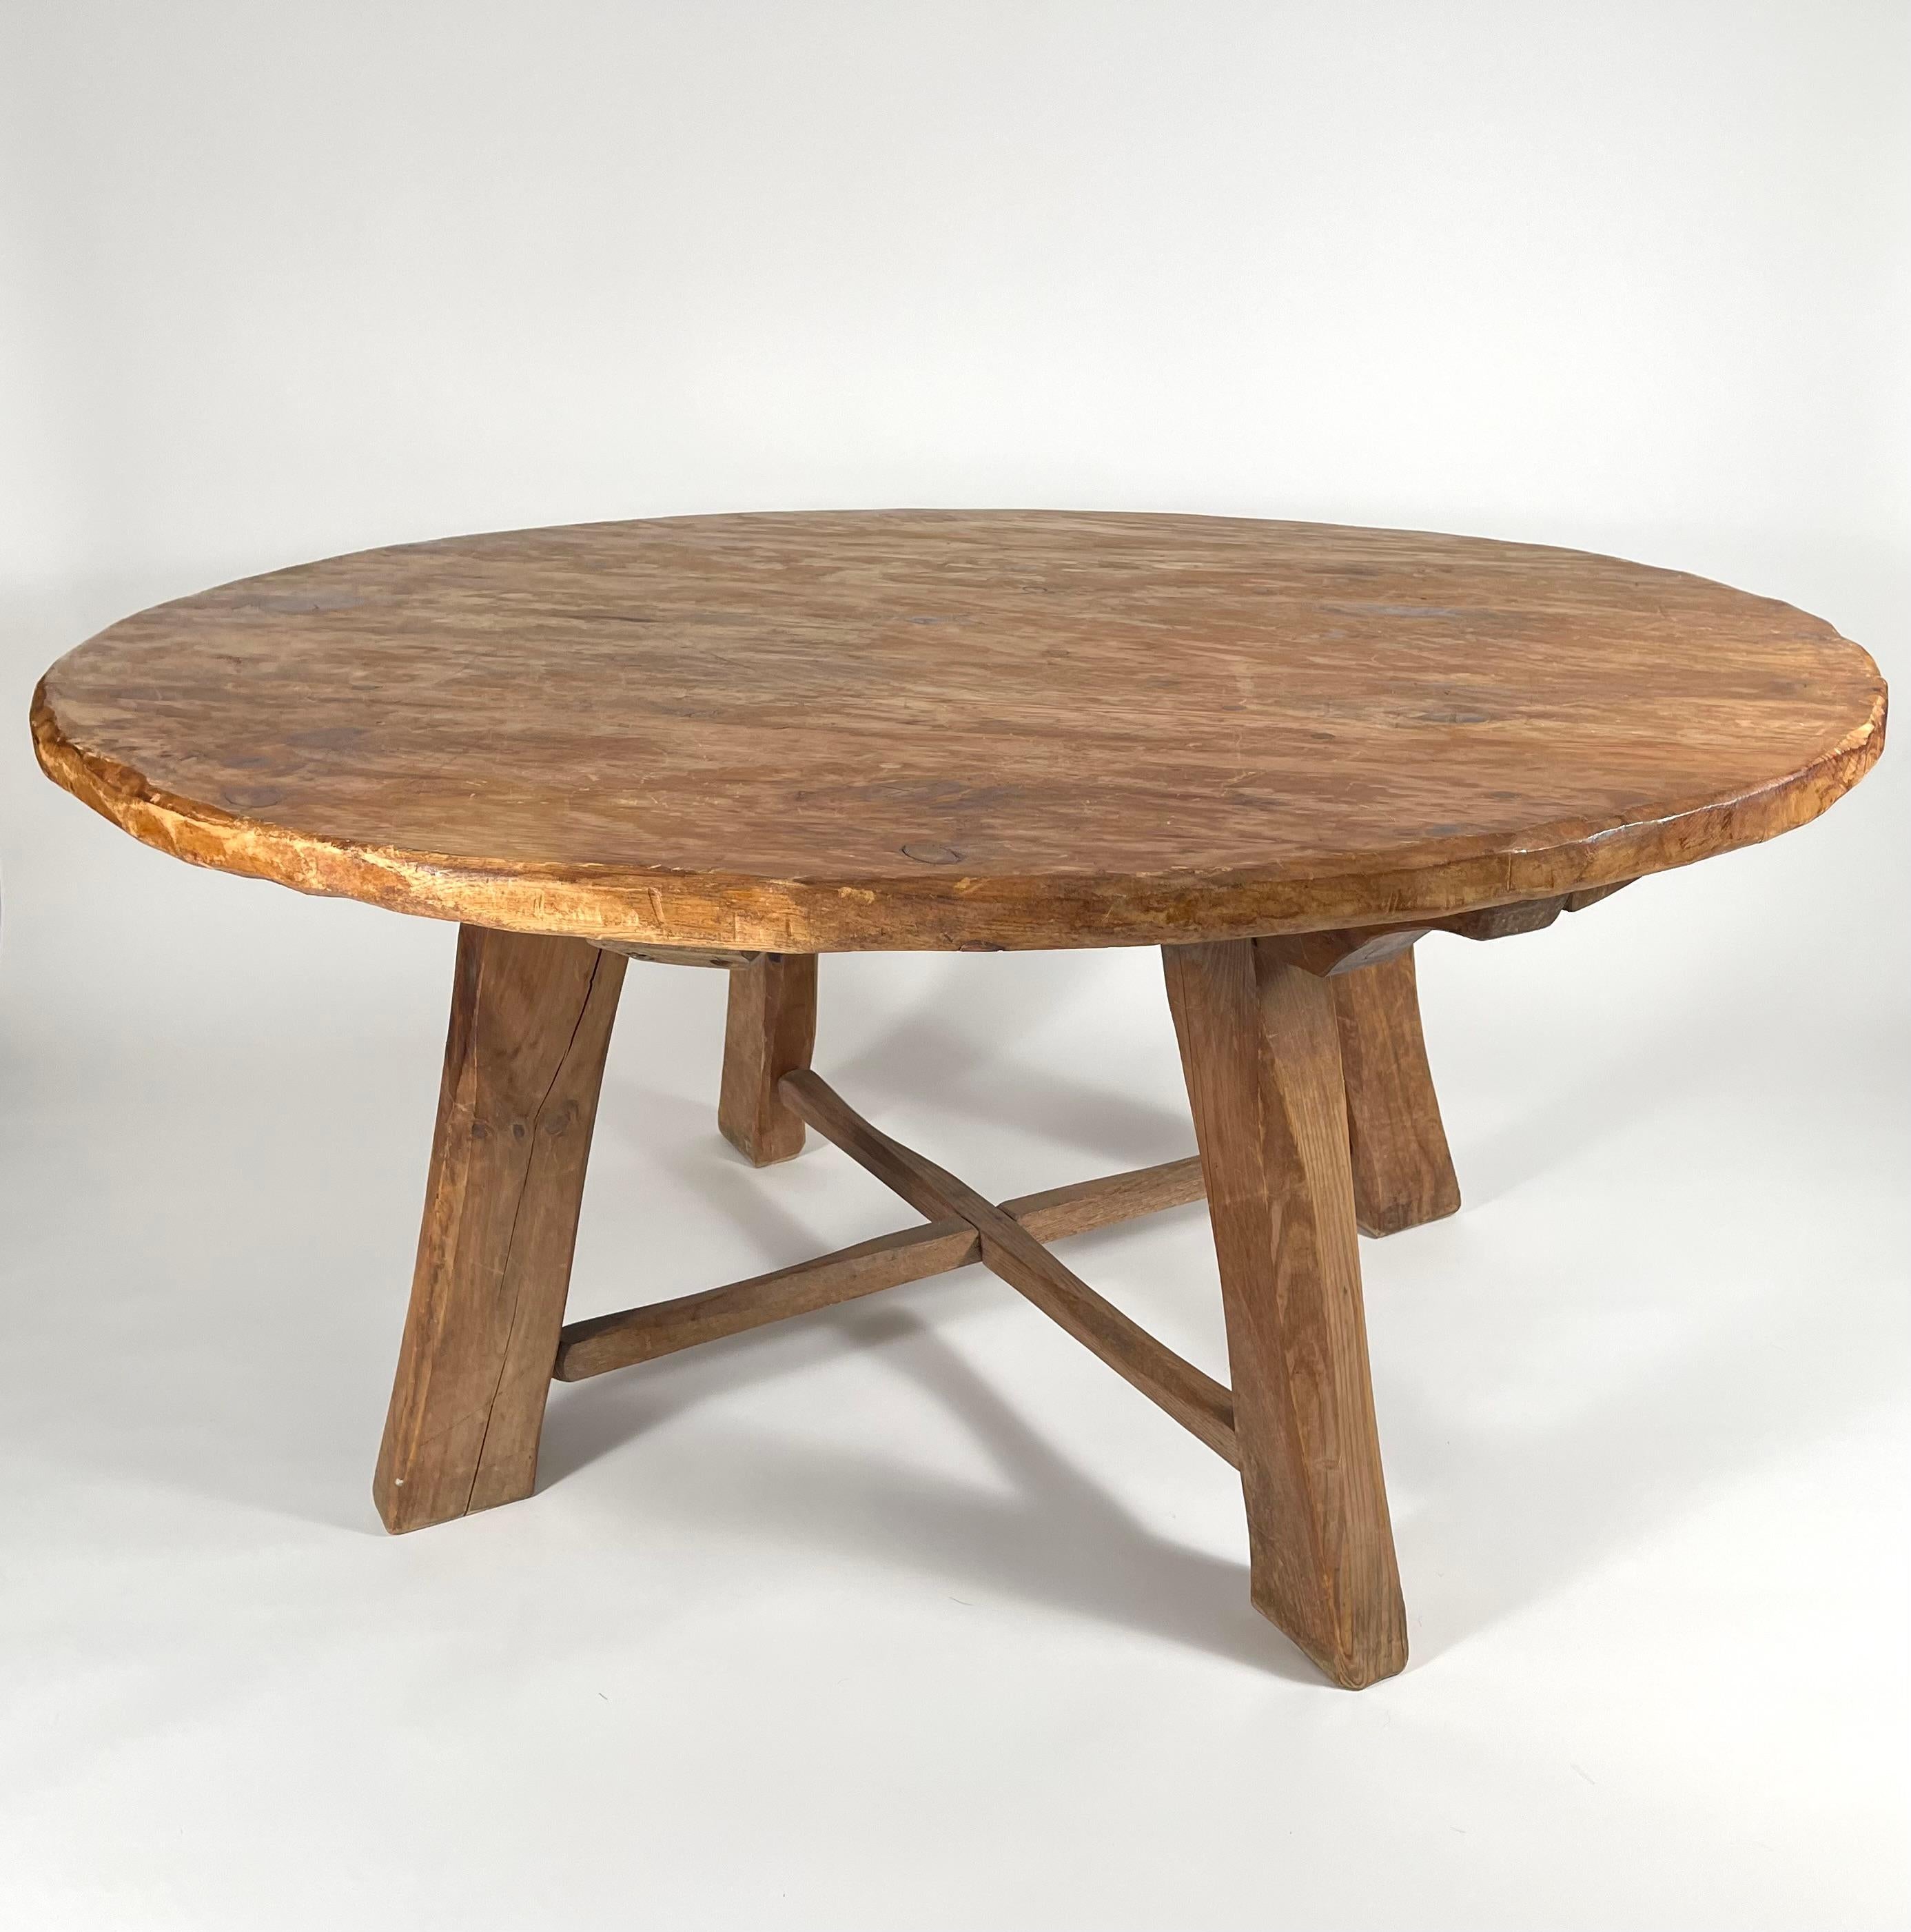 A pine round dining table with carved rusticated top and 4 heavy square section legs, chamfered and rusticated, joined by cross stretchers. Good, natural, surface. Comfortably seats 8. Very solid, with character and a strong form.